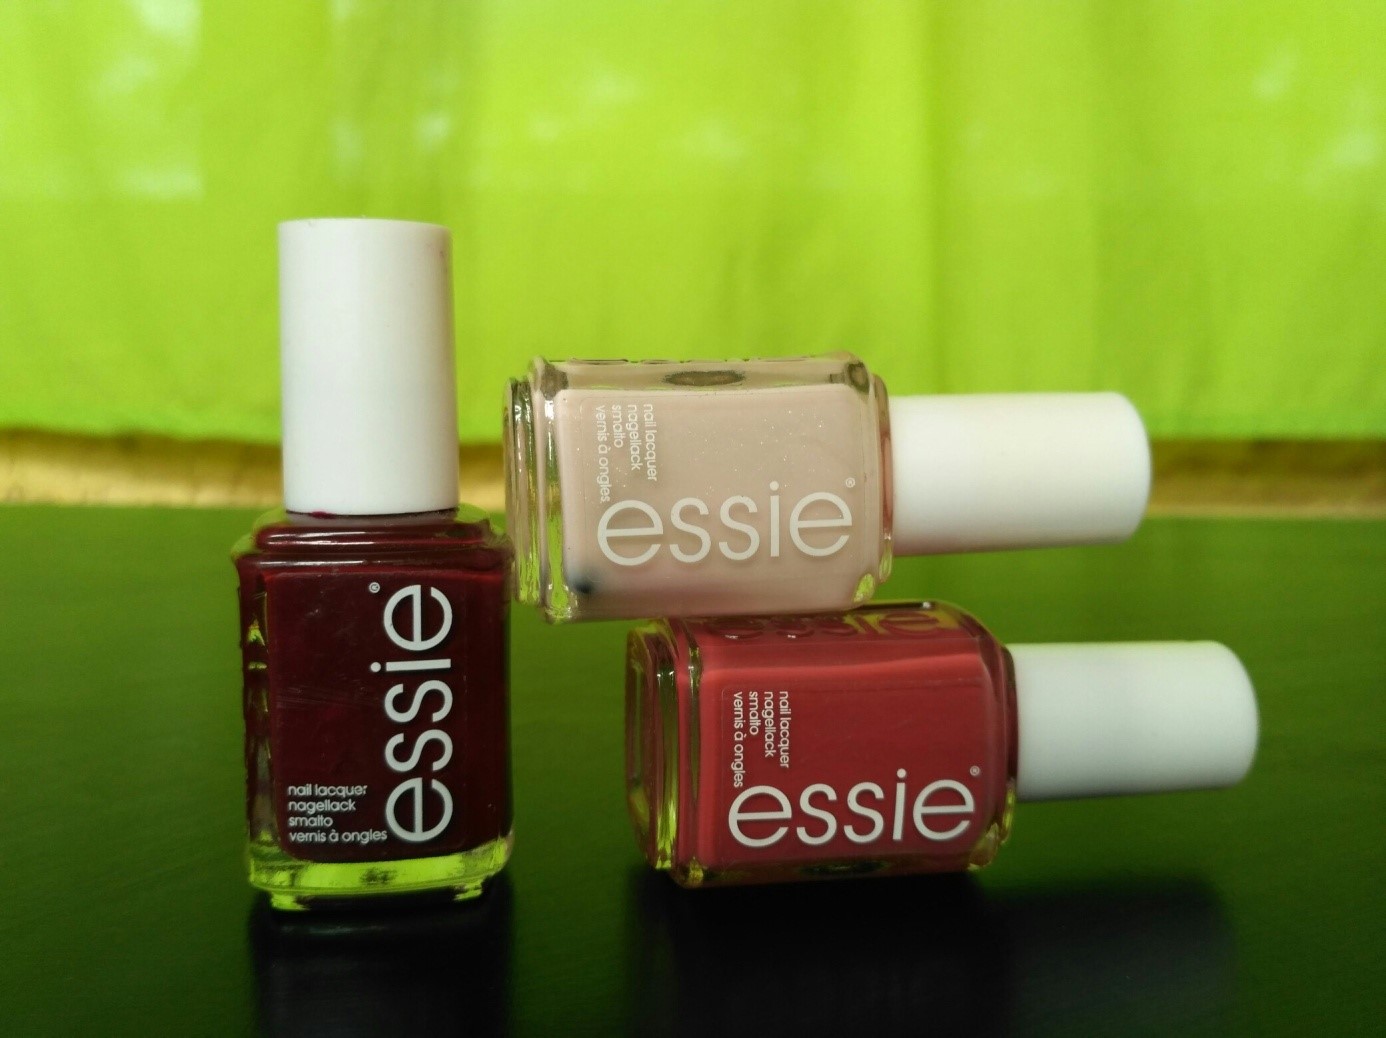 Its Nail (Essie Review) Worth This Is Lacquer Polish Money?